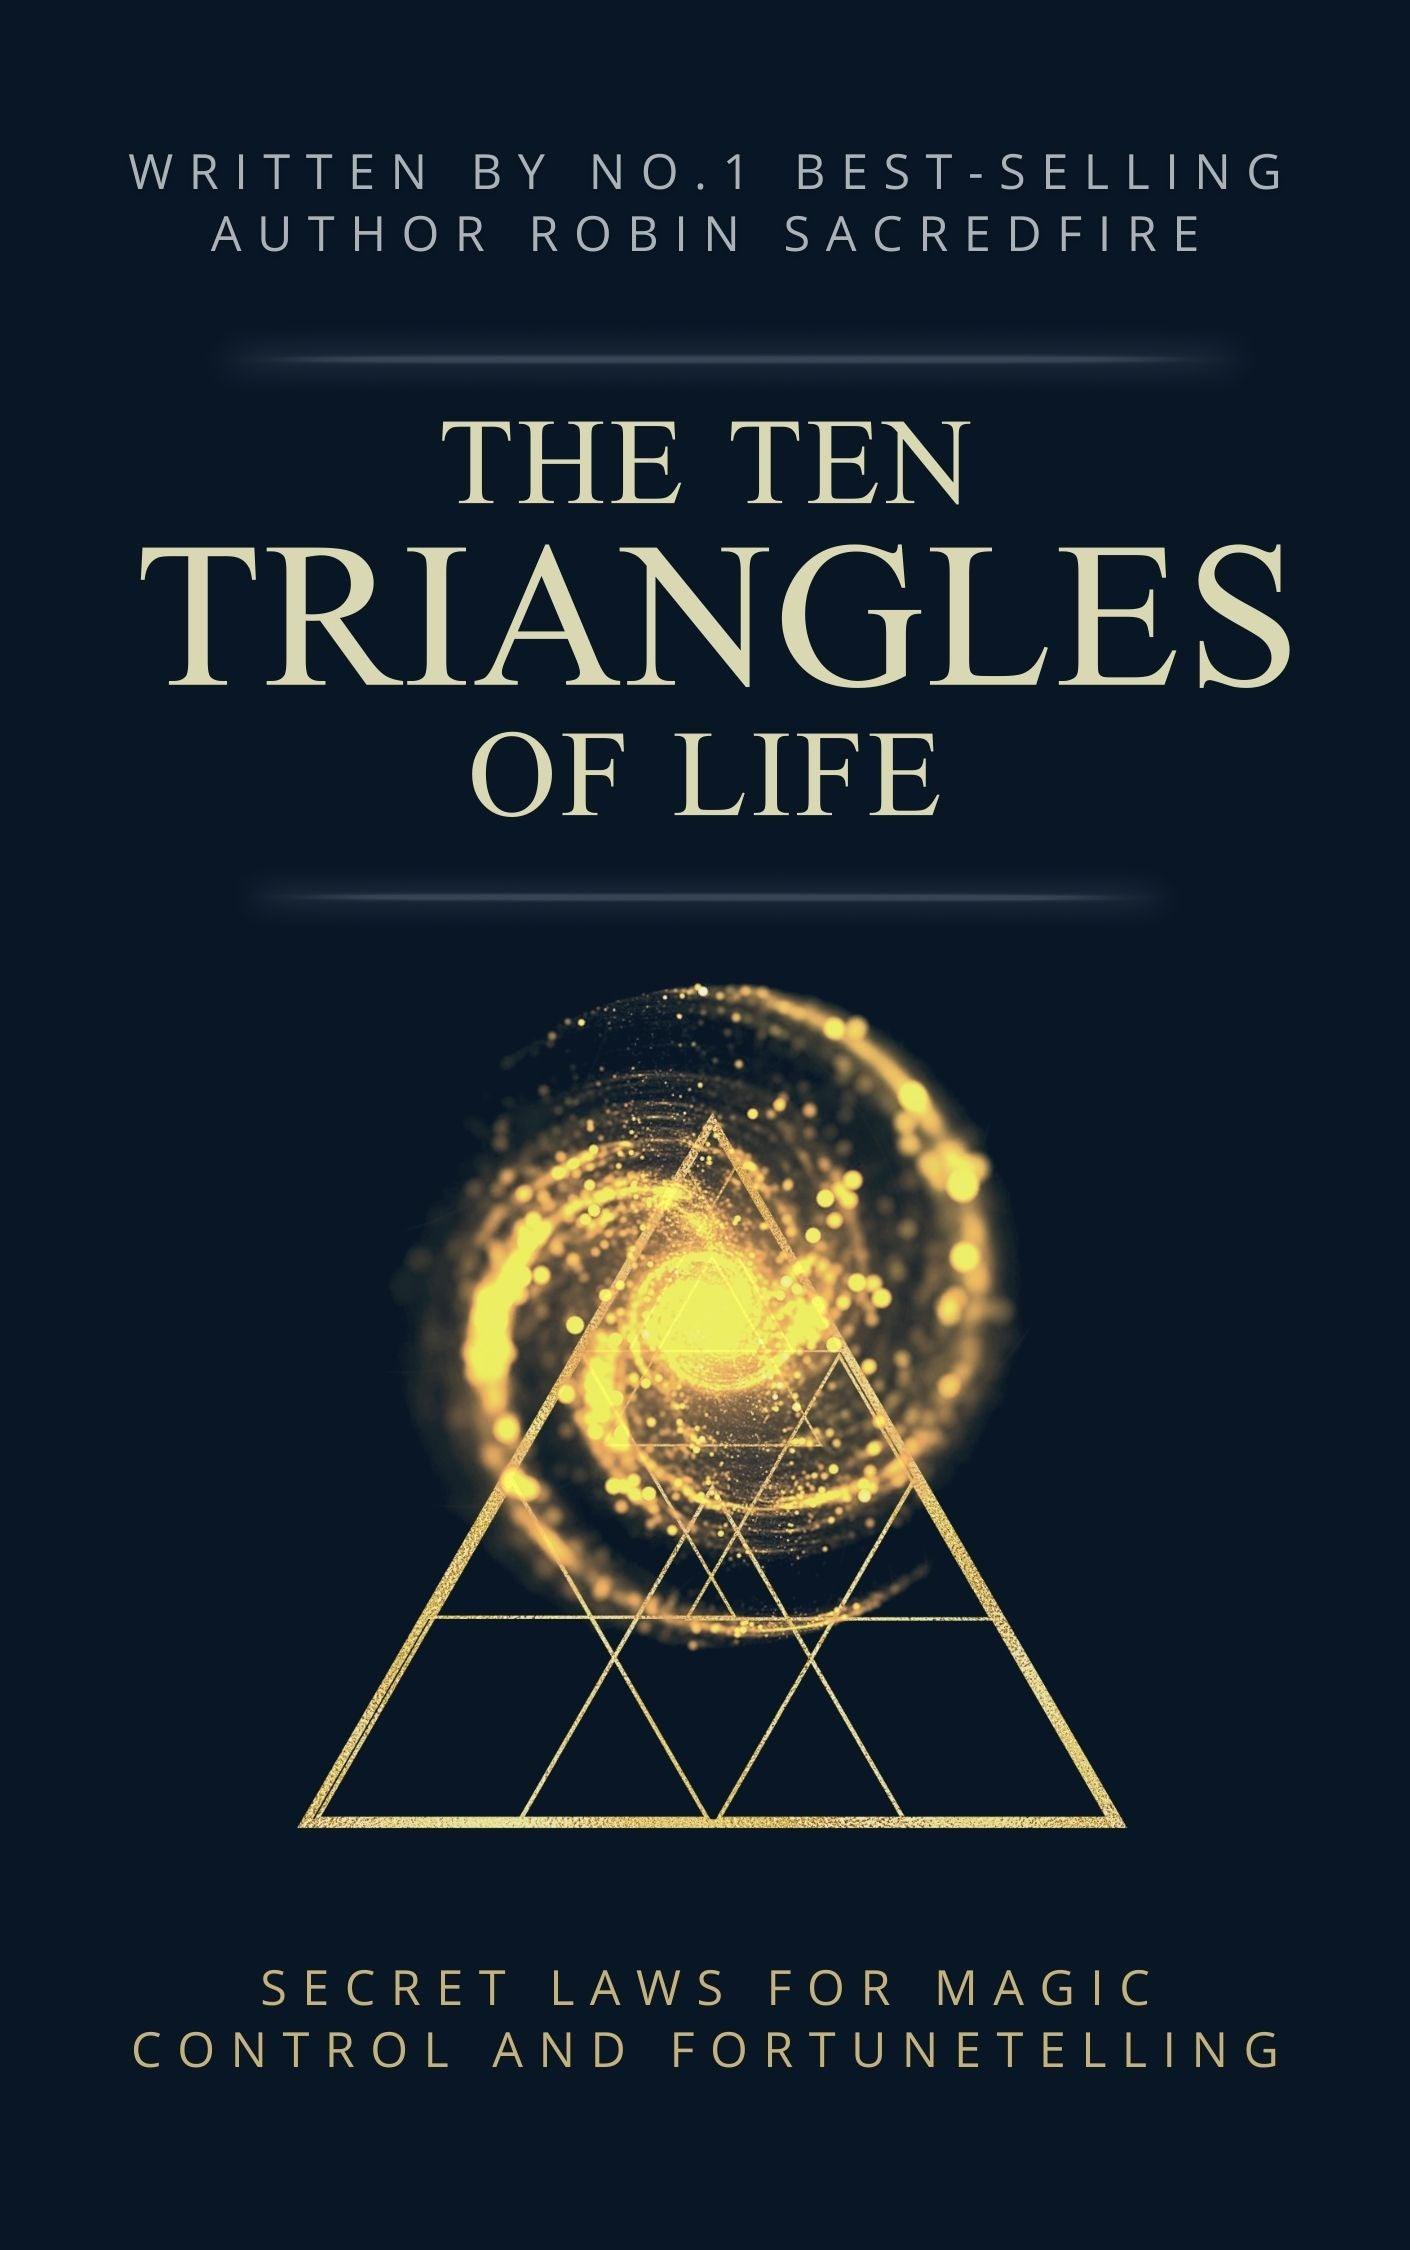 The 10 Triangles of Life - 22 Lions